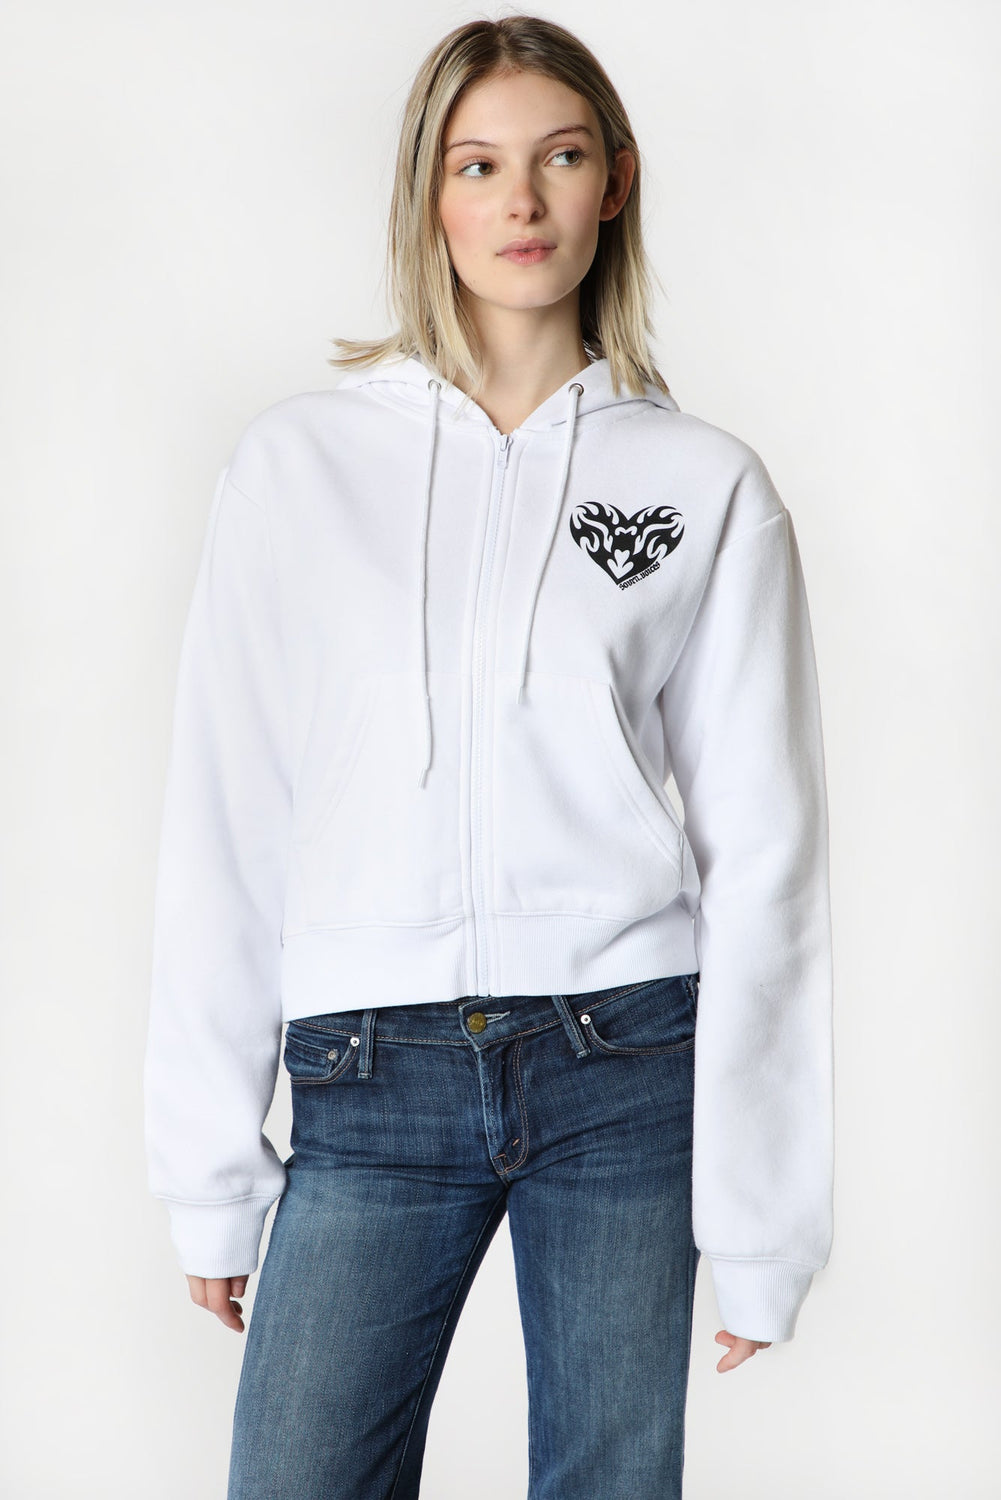 Womens Sovrn Voices Graphic Zip-Up Hoodie Womens Sovrn Voices Graphic Zip-Up Hoodie